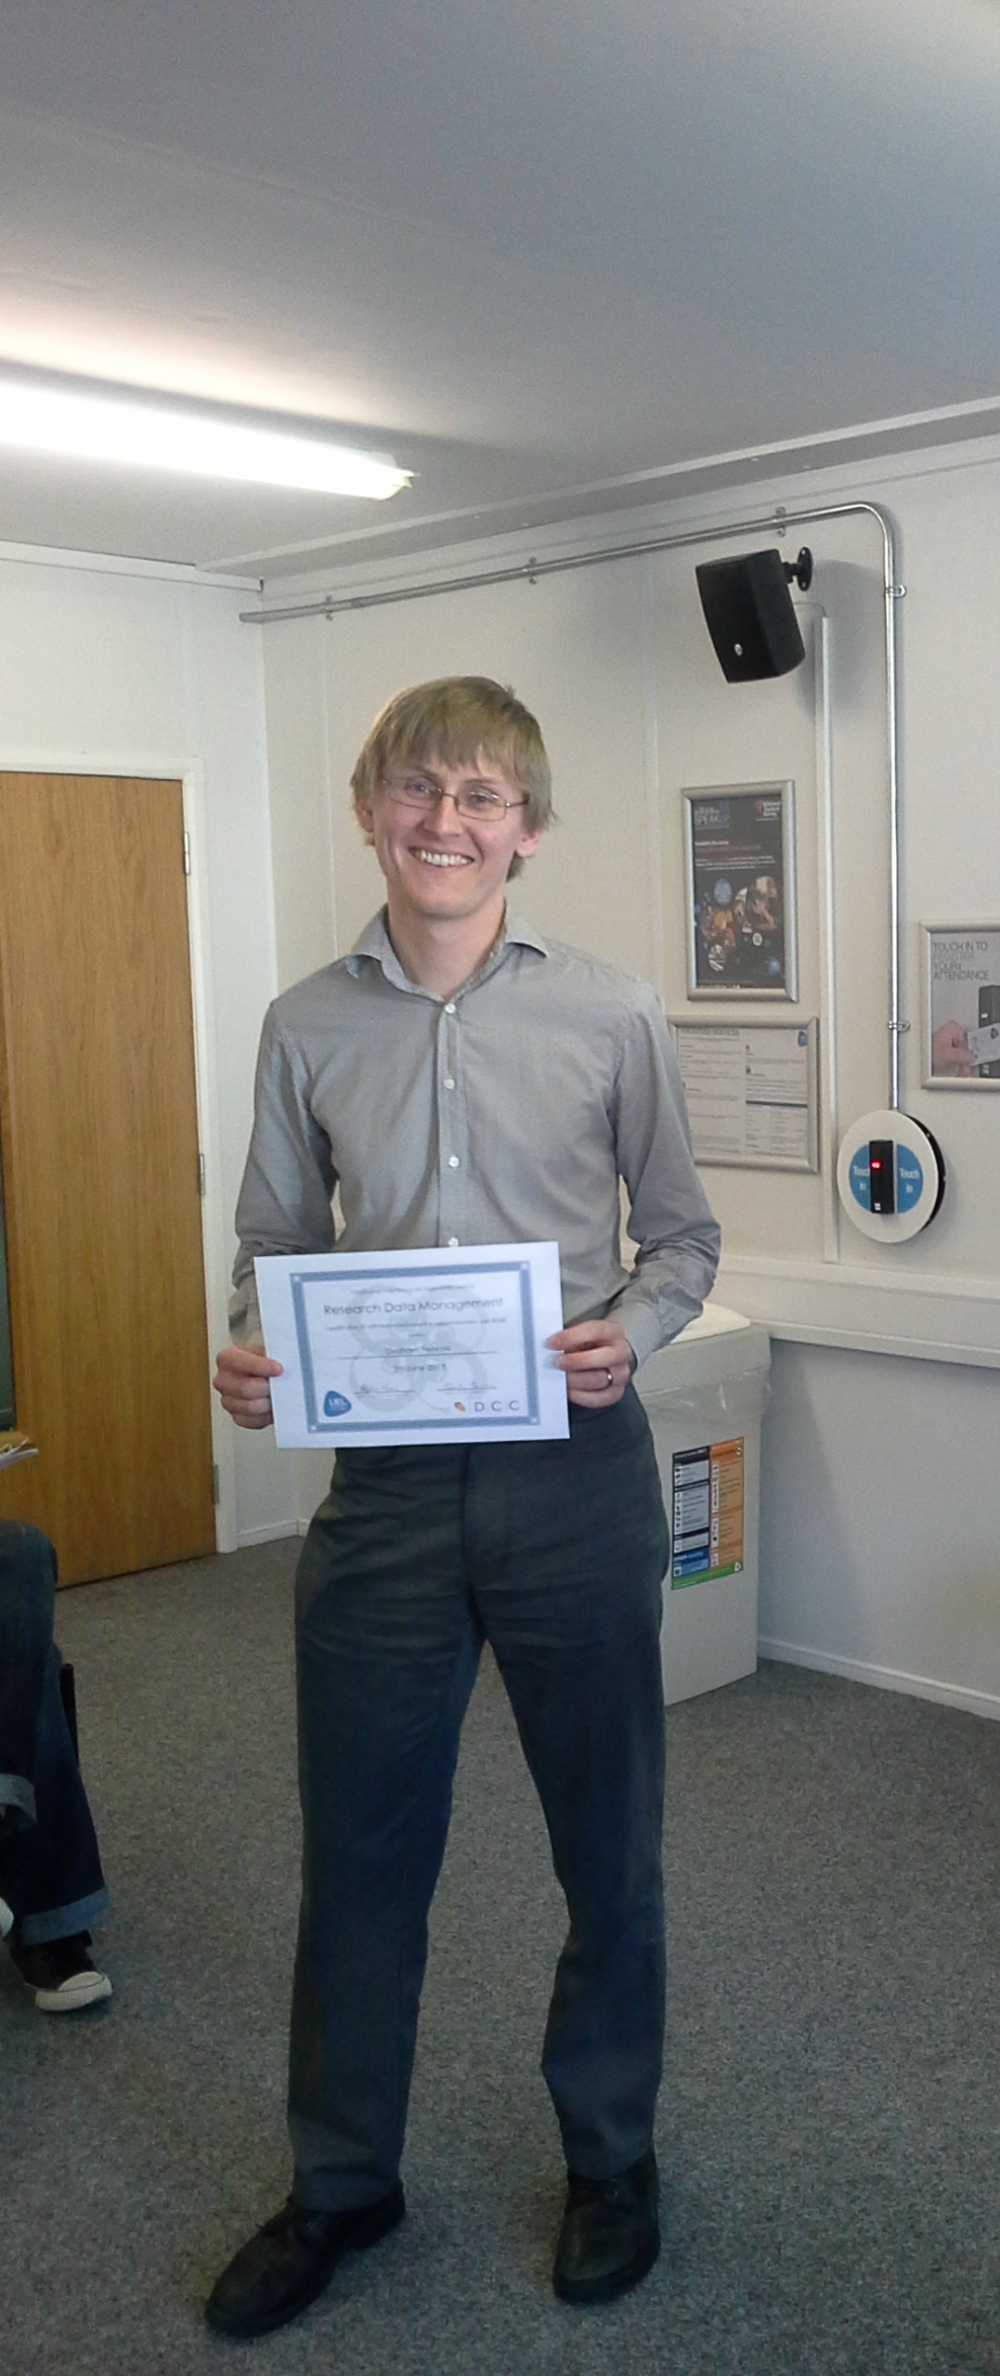 Receiving his supportDM certificate